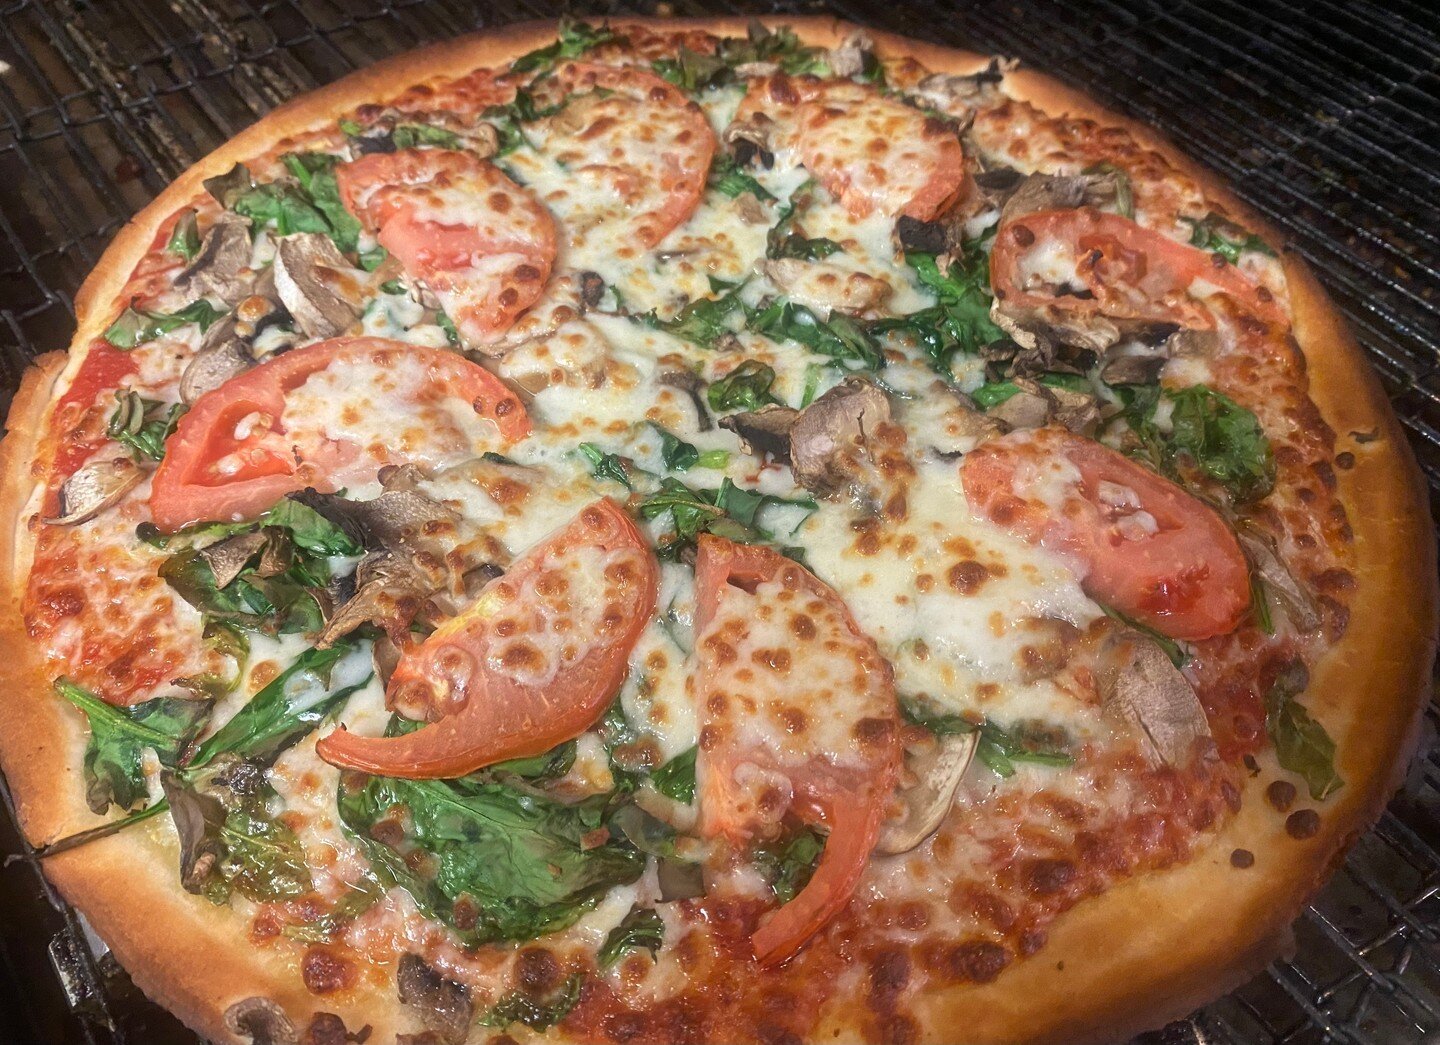 We have Gluten Free pizza crust.  You can order them for dine in, carry out or delivery.